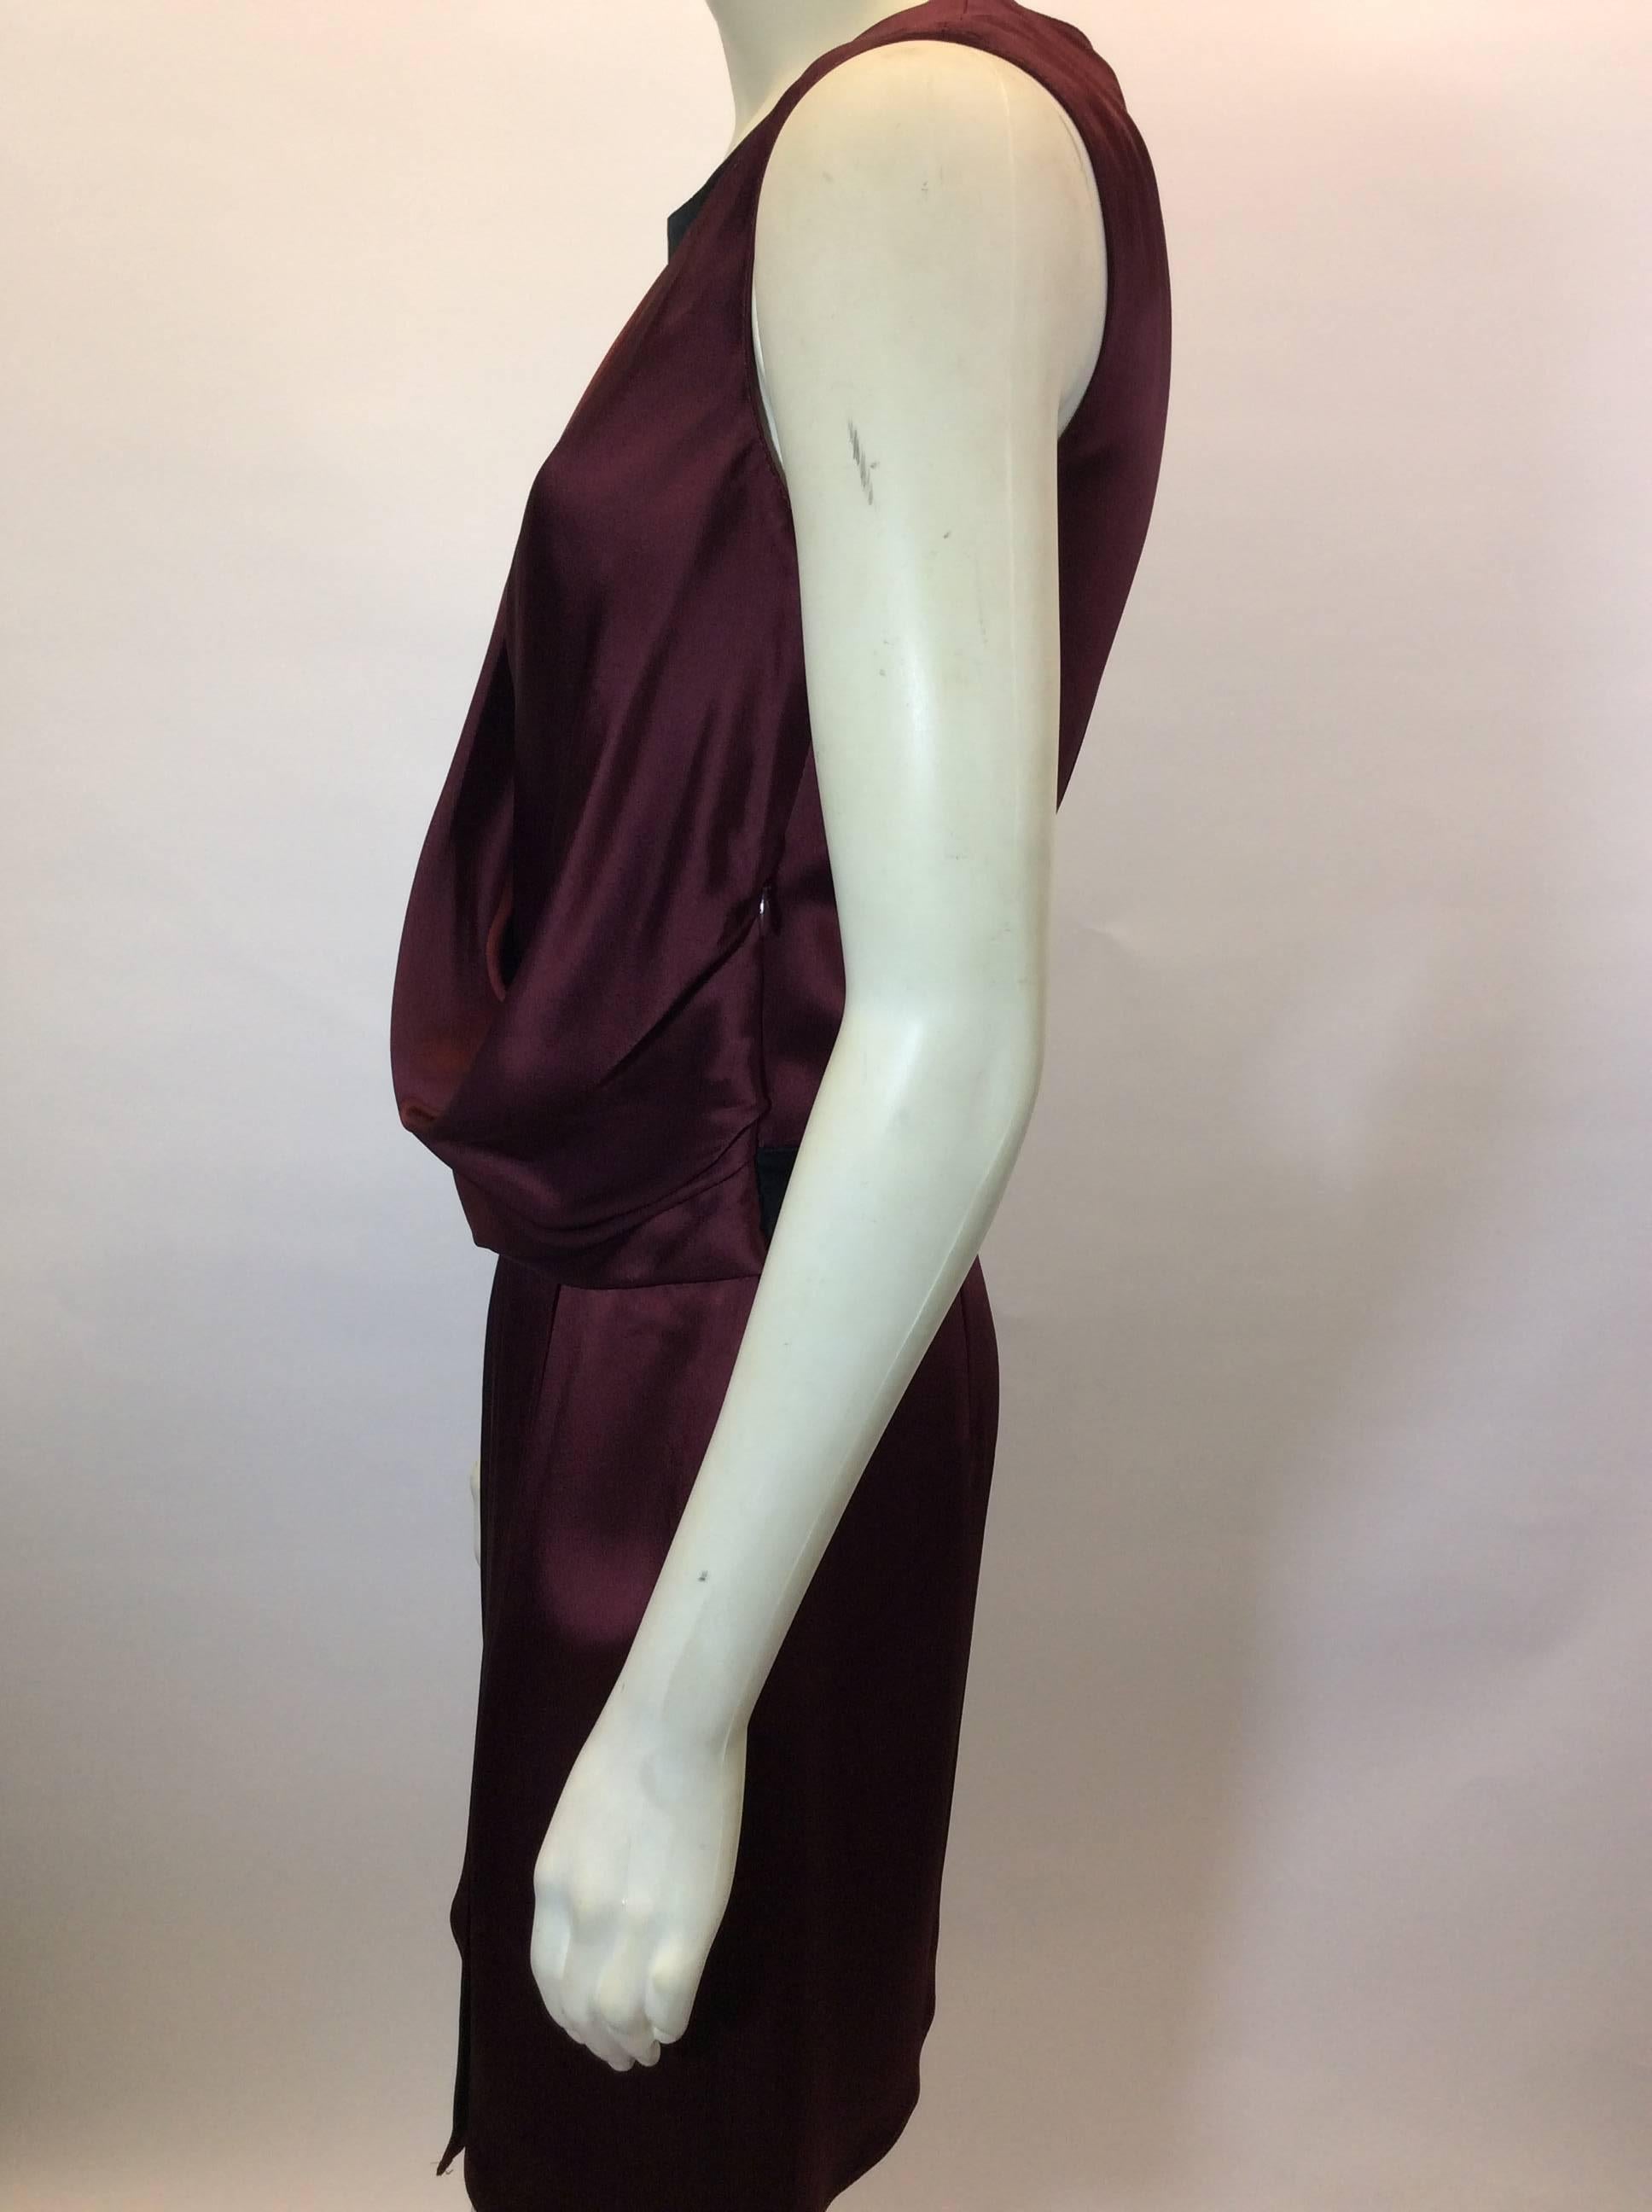 Burgundy Draped Dress with Black Drop Waist Detail
Center back and side seam zipper closures
Slit skirt as seen in image 6
Draped bodice design
Size 0
64% Acetate, 36% Viscose